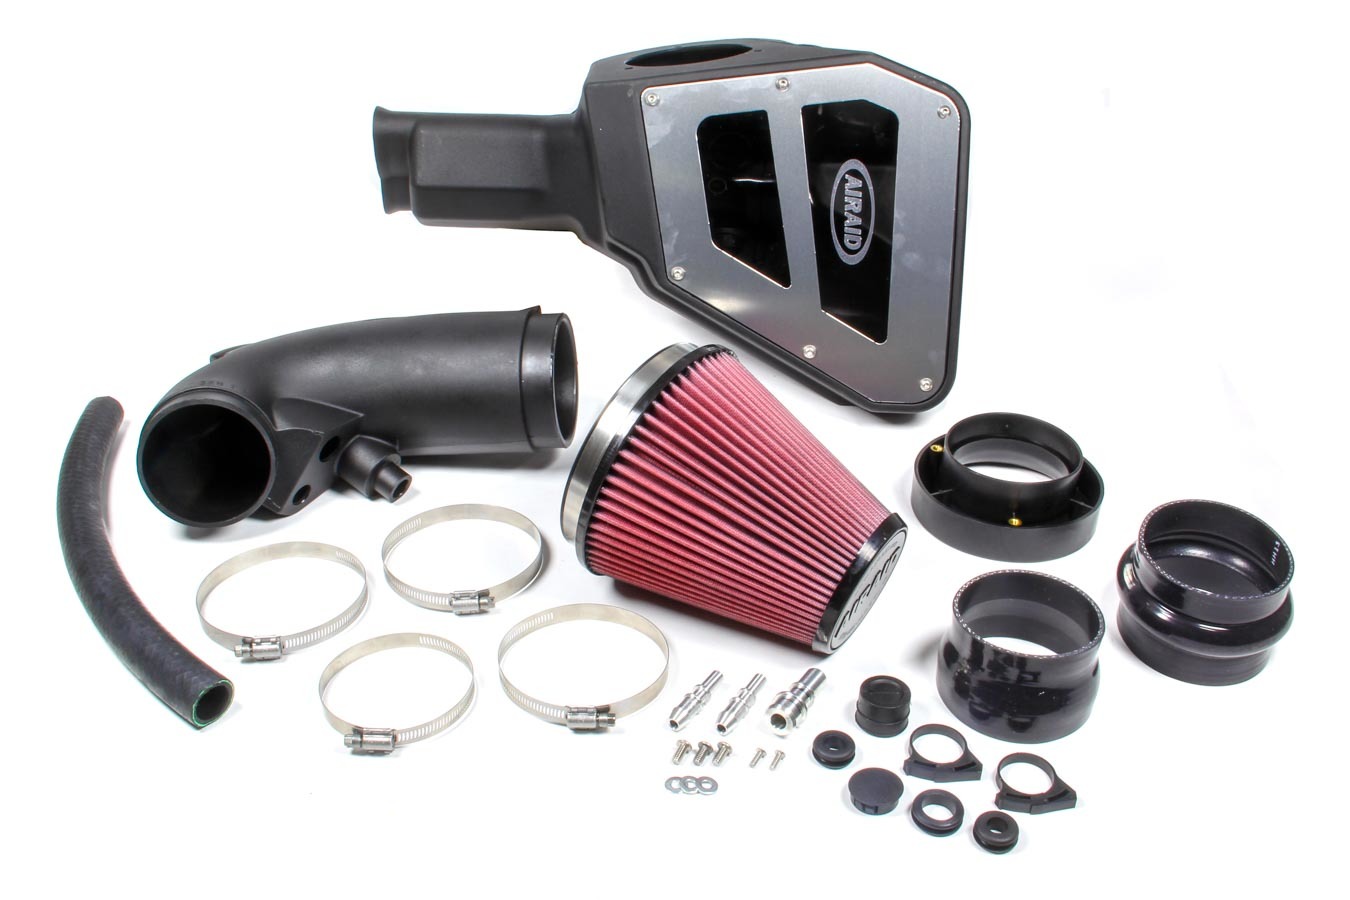 AIRAID Air Induction System, MXP, Reusable Oiled Filter, Ford Coyote, Ford Mustang 2015, Kit